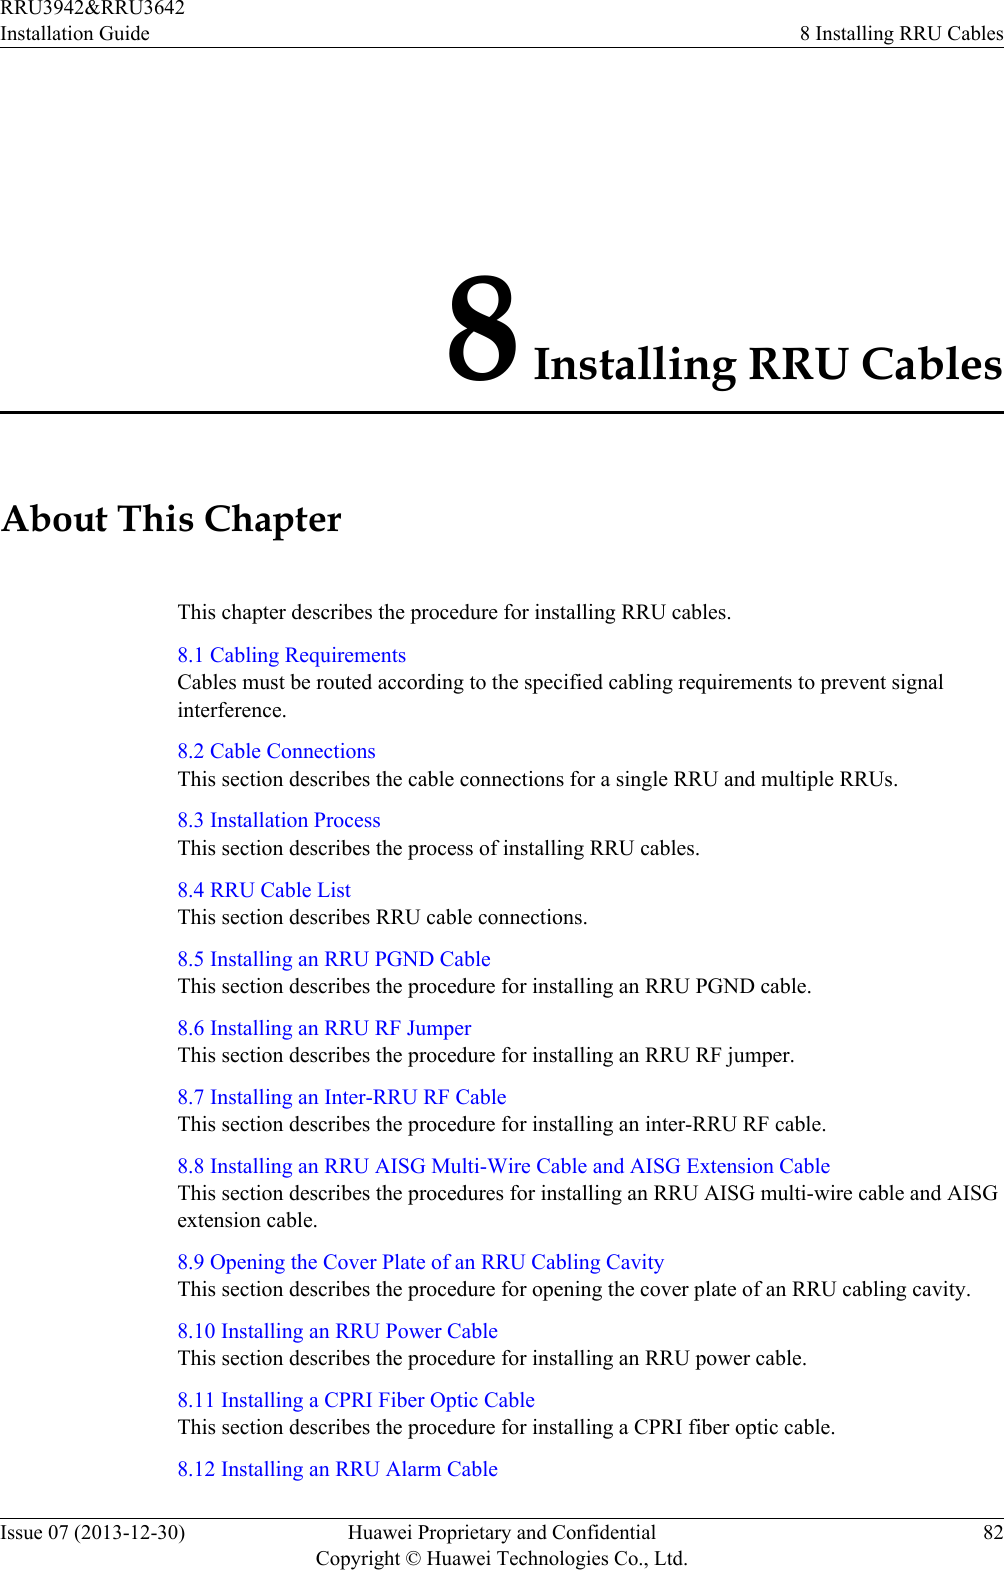 8 Installing RRU CablesAbout This ChapterThis chapter describes the procedure for installing RRU cables.8.1 Cabling RequirementsCables must be routed according to the specified cabling requirements to prevent signalinterference.8.2 Cable ConnectionsThis section describes the cable connections for a single RRU and multiple RRUs.8.3 Installation ProcessThis section describes the process of installing RRU cables.8.4 RRU Cable ListThis section describes RRU cable connections.8.5 Installing an RRU PGND CableThis section describes the procedure for installing an RRU PGND cable.8.6 Installing an RRU RF JumperThis section describes the procedure for installing an RRU RF jumper.8.7 Installing an Inter-RRU RF CableThis section describes the procedure for installing an inter-RRU RF cable.8.8 Installing an RRU AISG Multi-Wire Cable and AISG Extension CableThis section describes the procedures for installing an RRU AISG multi-wire cable and AISGextension cable.8.9 Opening the Cover Plate of an RRU Cabling CavityThis section describes the procedure for opening the cover plate of an RRU cabling cavity.8.10 Installing an RRU Power CableThis section describes the procedure for installing an RRU power cable.8.11 Installing a CPRI Fiber Optic CableThis section describes the procedure for installing a CPRI fiber optic cable.8.12 Installing an RRU Alarm CableRRU3942&amp;RRU3642Installation Guide 8 Installing RRU CablesIssue 07 (2013-12-30) Huawei Proprietary and ConfidentialCopyright © Huawei Technologies Co., Ltd.82